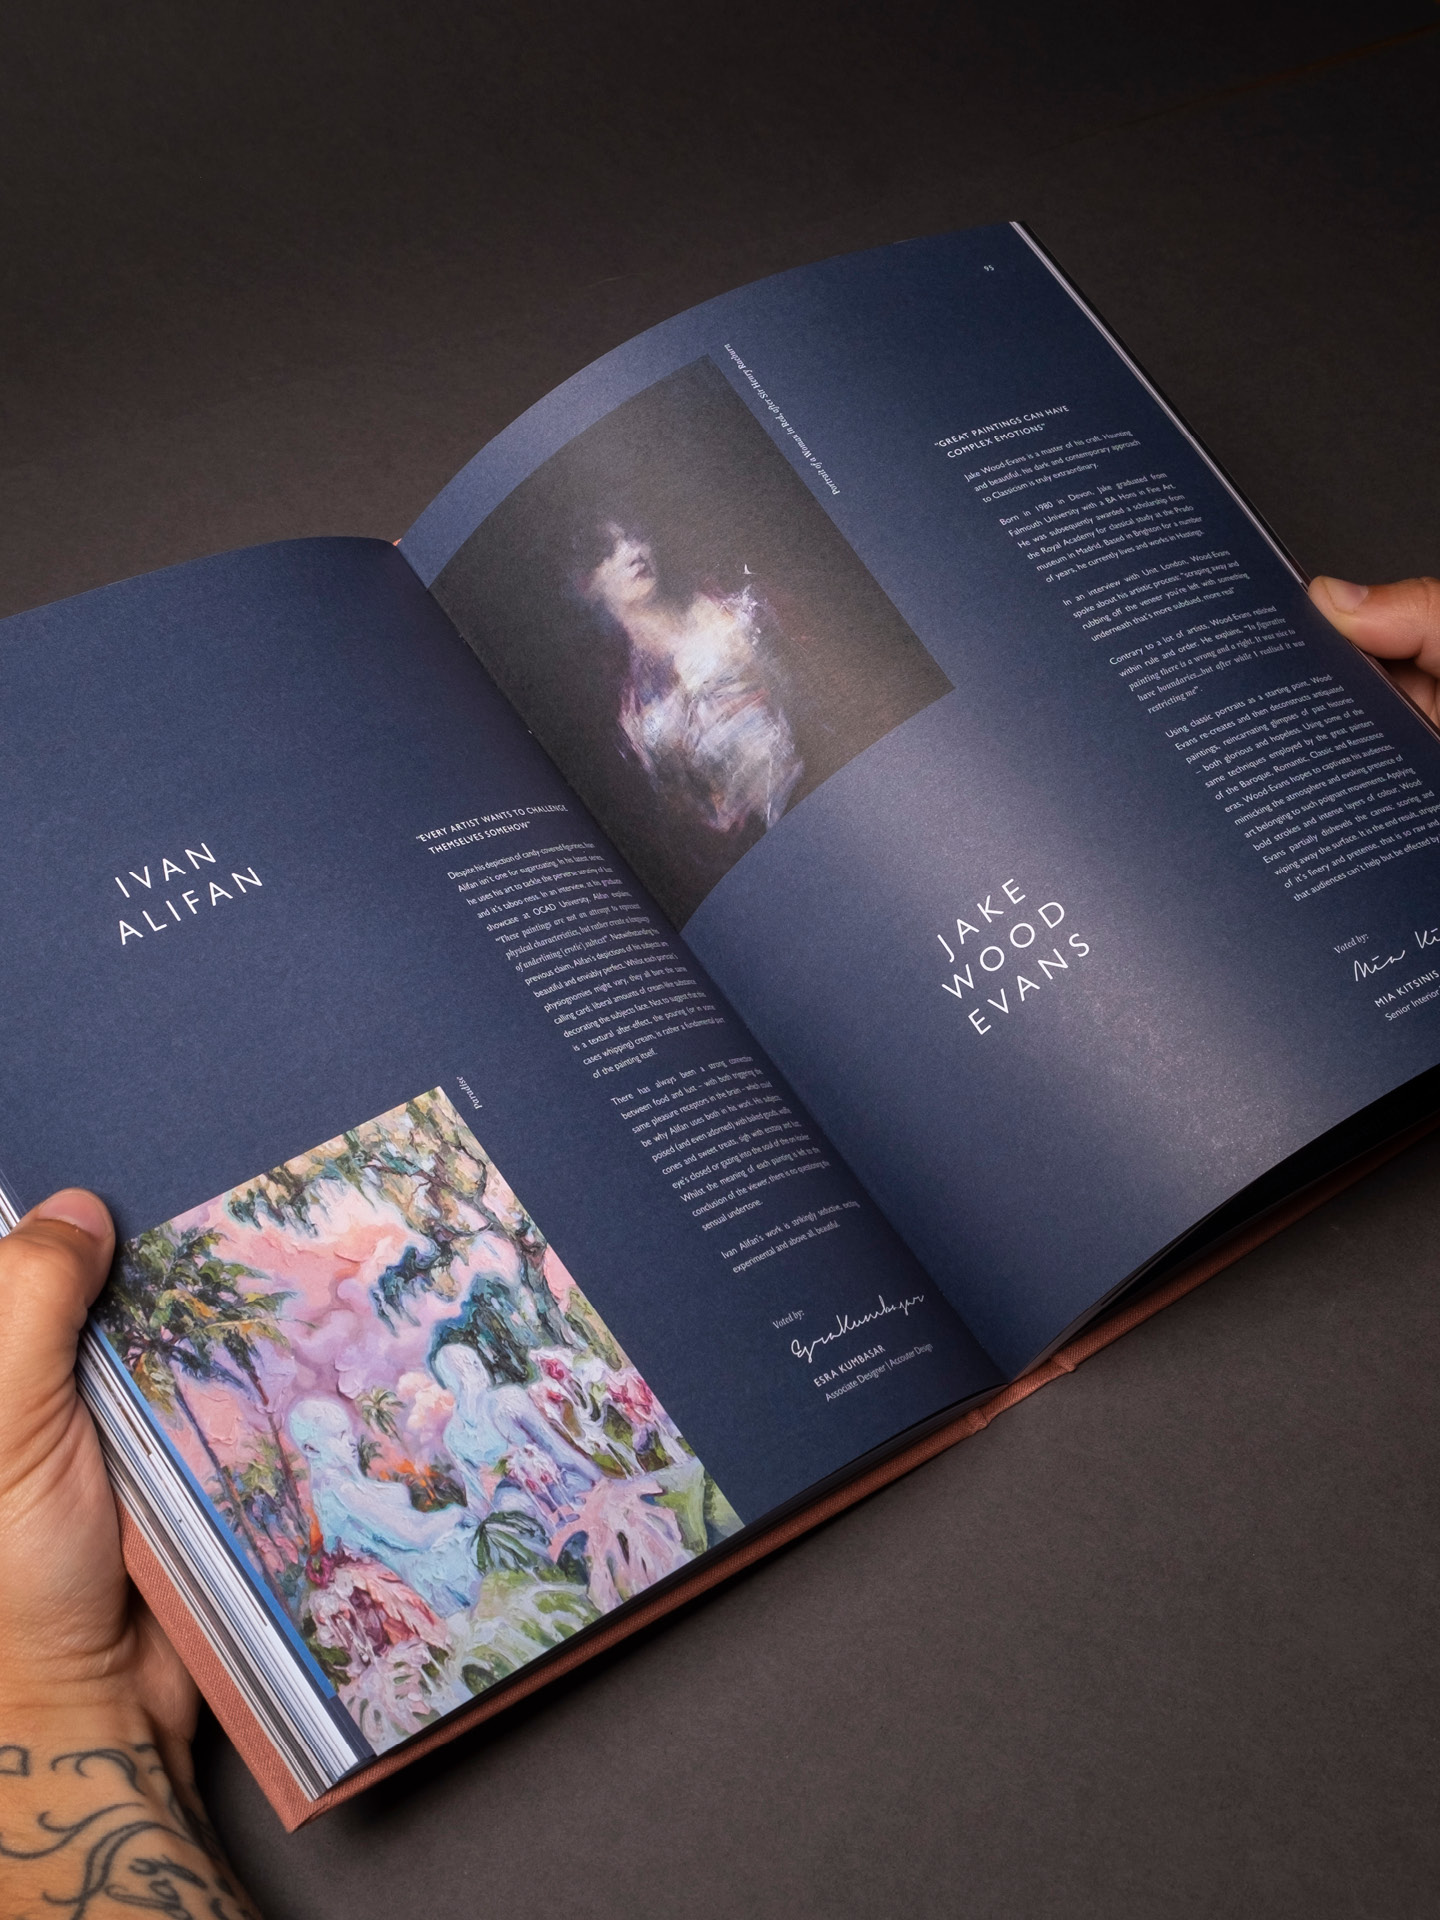 Printed spread from the Accouter Four annual featuring artists Ivan Alifan and Jake Wood Evans